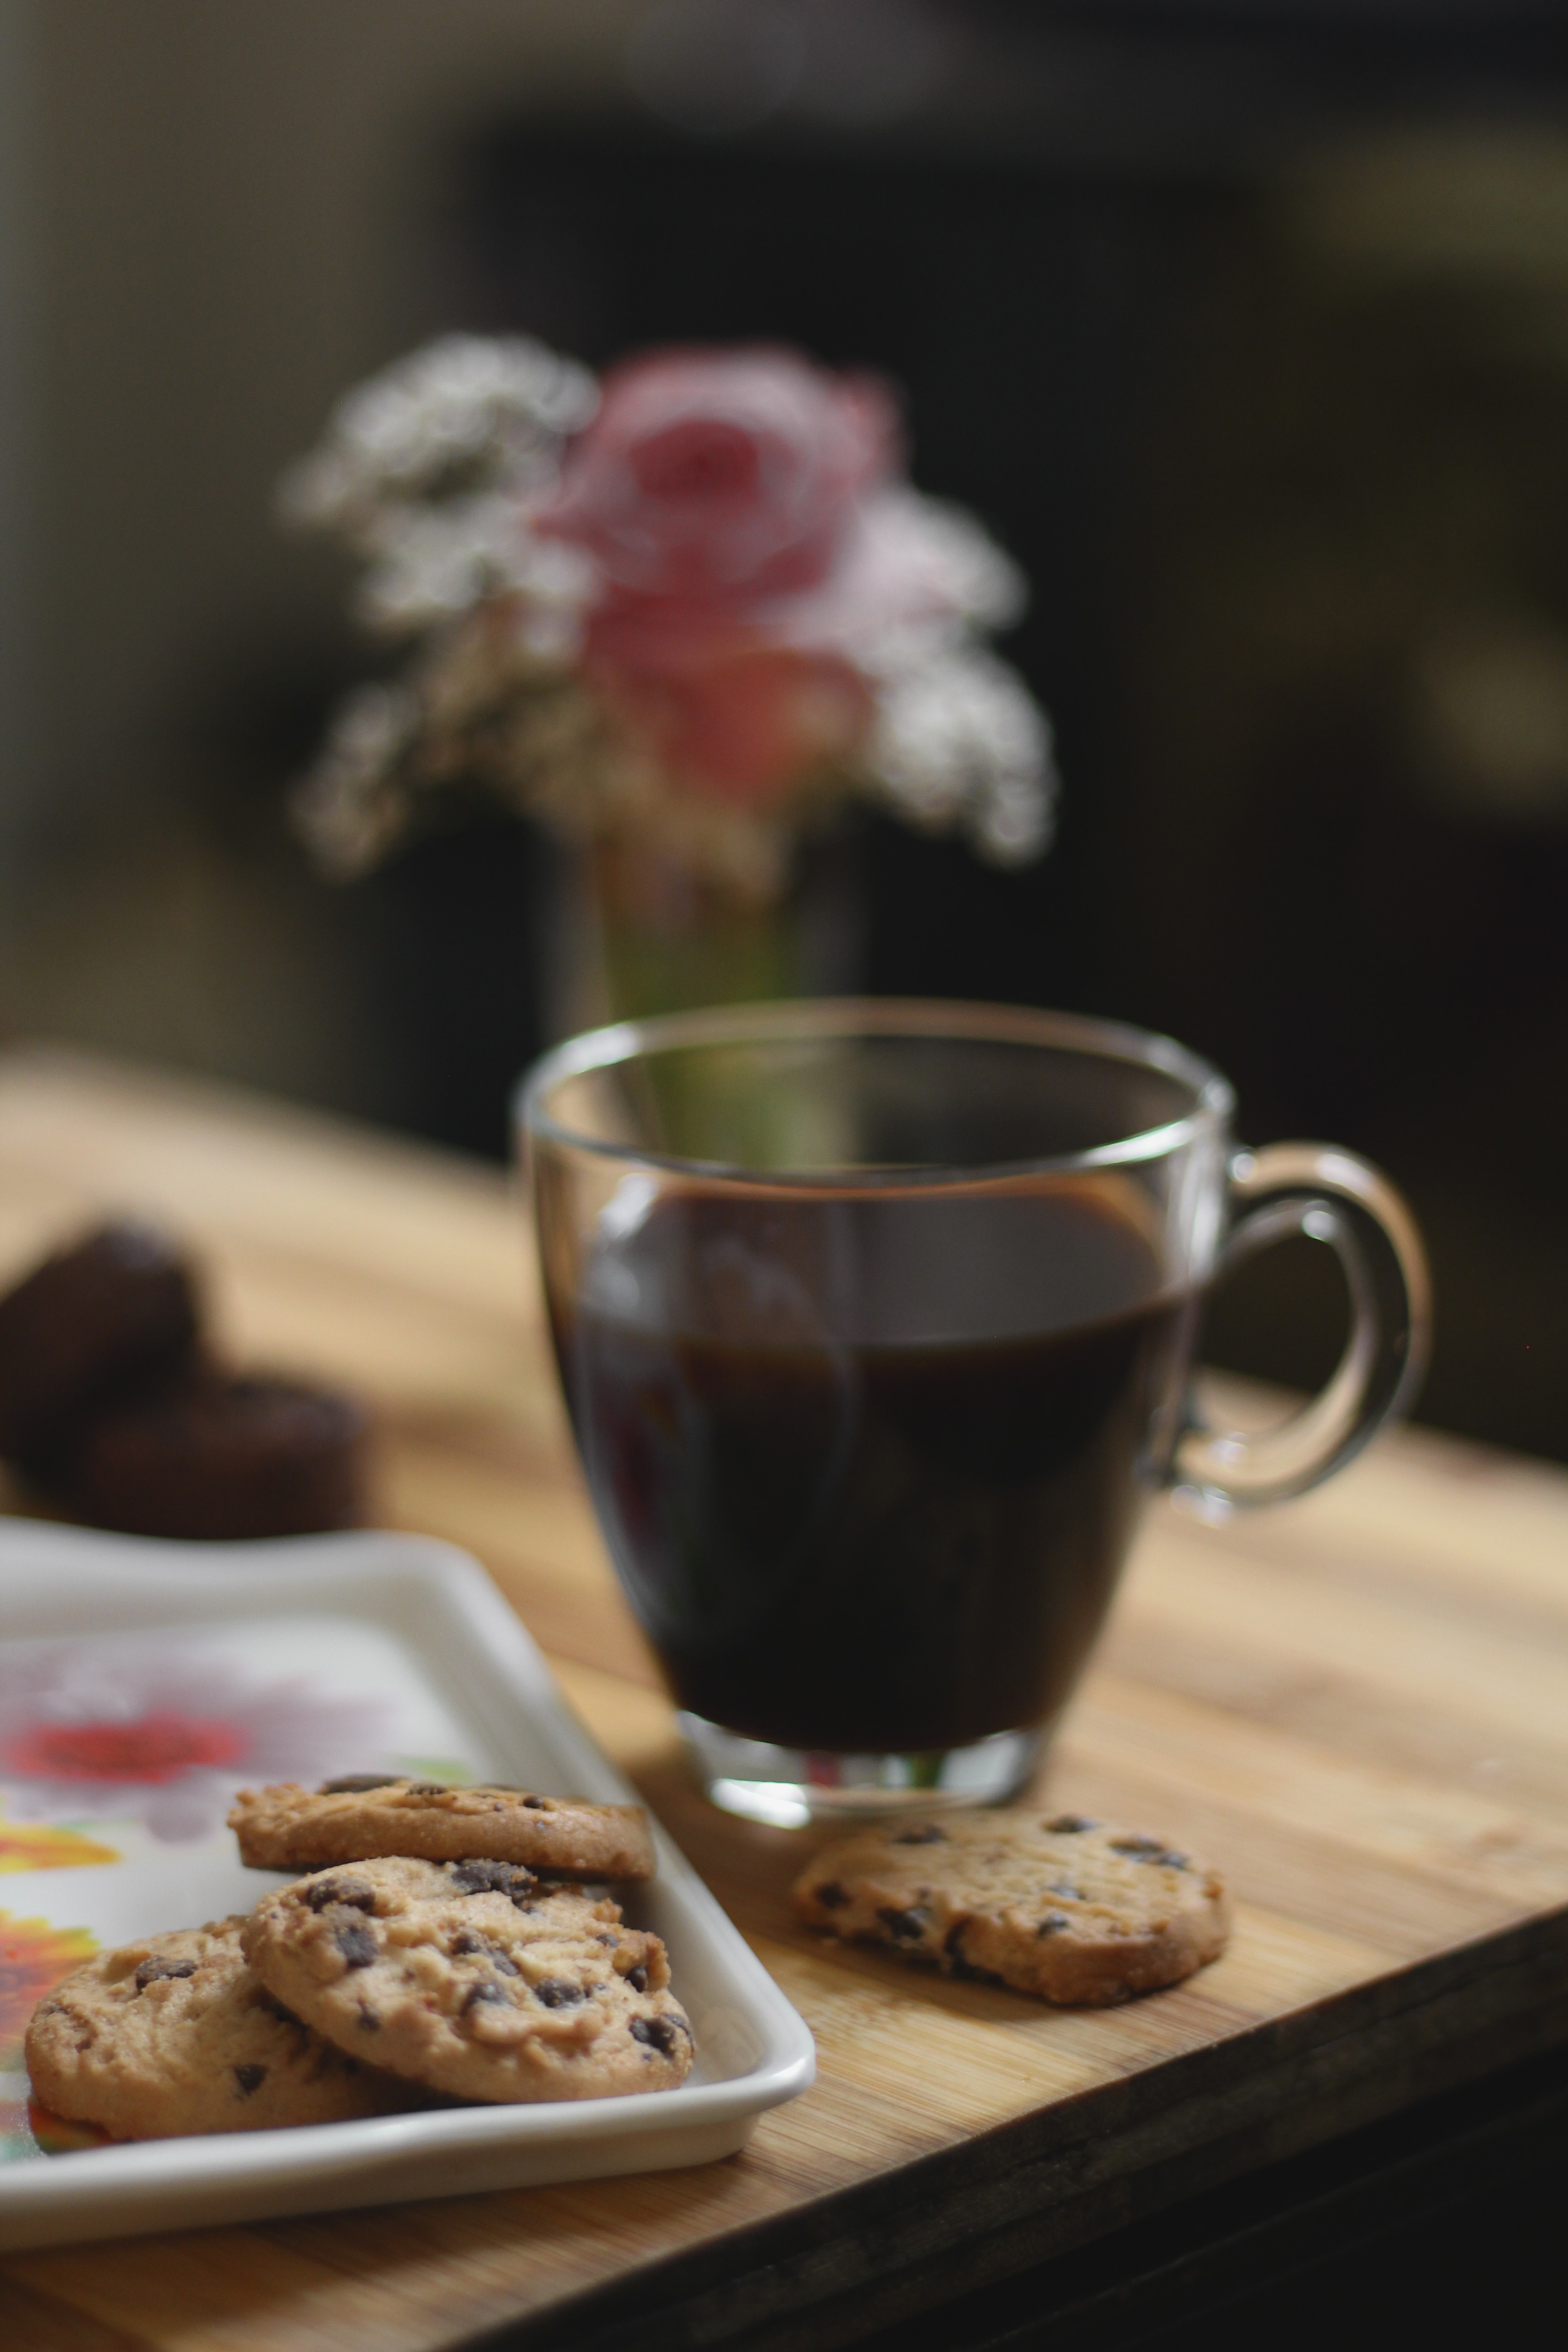 Glass Teacup Beside a Cookies on Tray Placed on Table, Black coffee, Blurred background, Breakfast, Close -up, HQ Photo